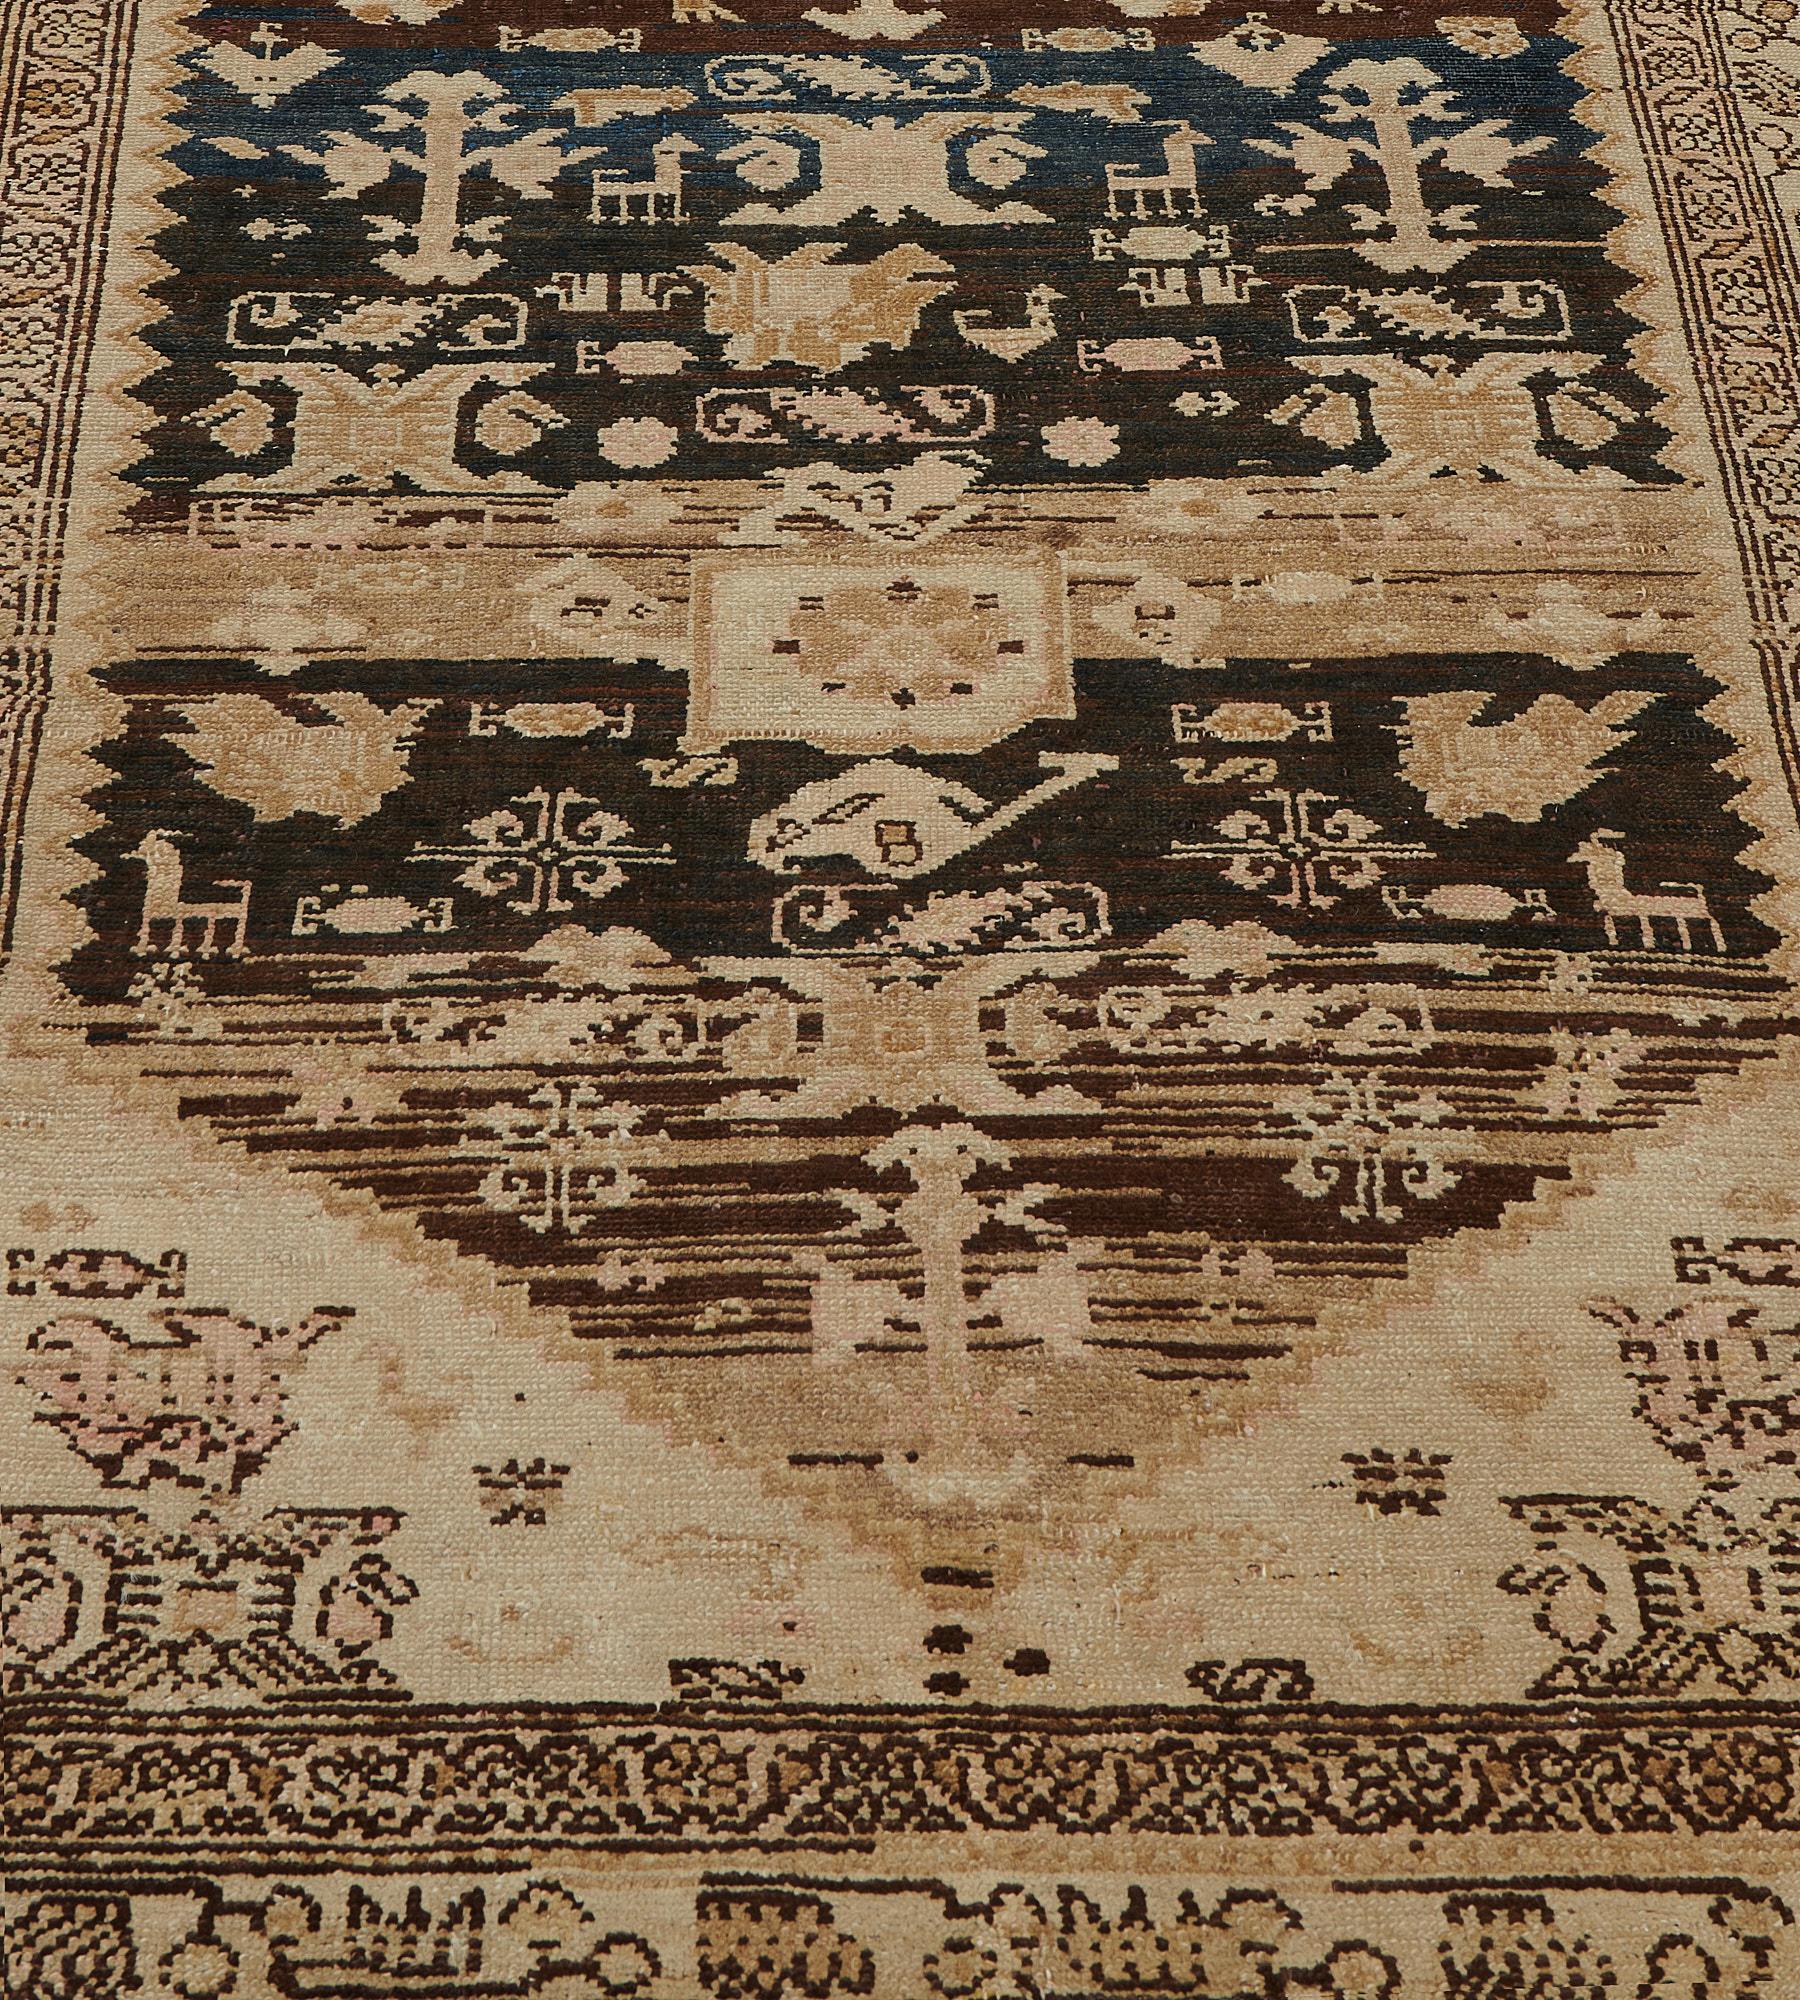 This antique, circa 1900, Persian Malayer runner has a shaded charcoal-blue and brown abrash field with a central terracotta-pink stepped medallion with angular flowerhead pendants containing a central square lozenge and surrounded by delicate